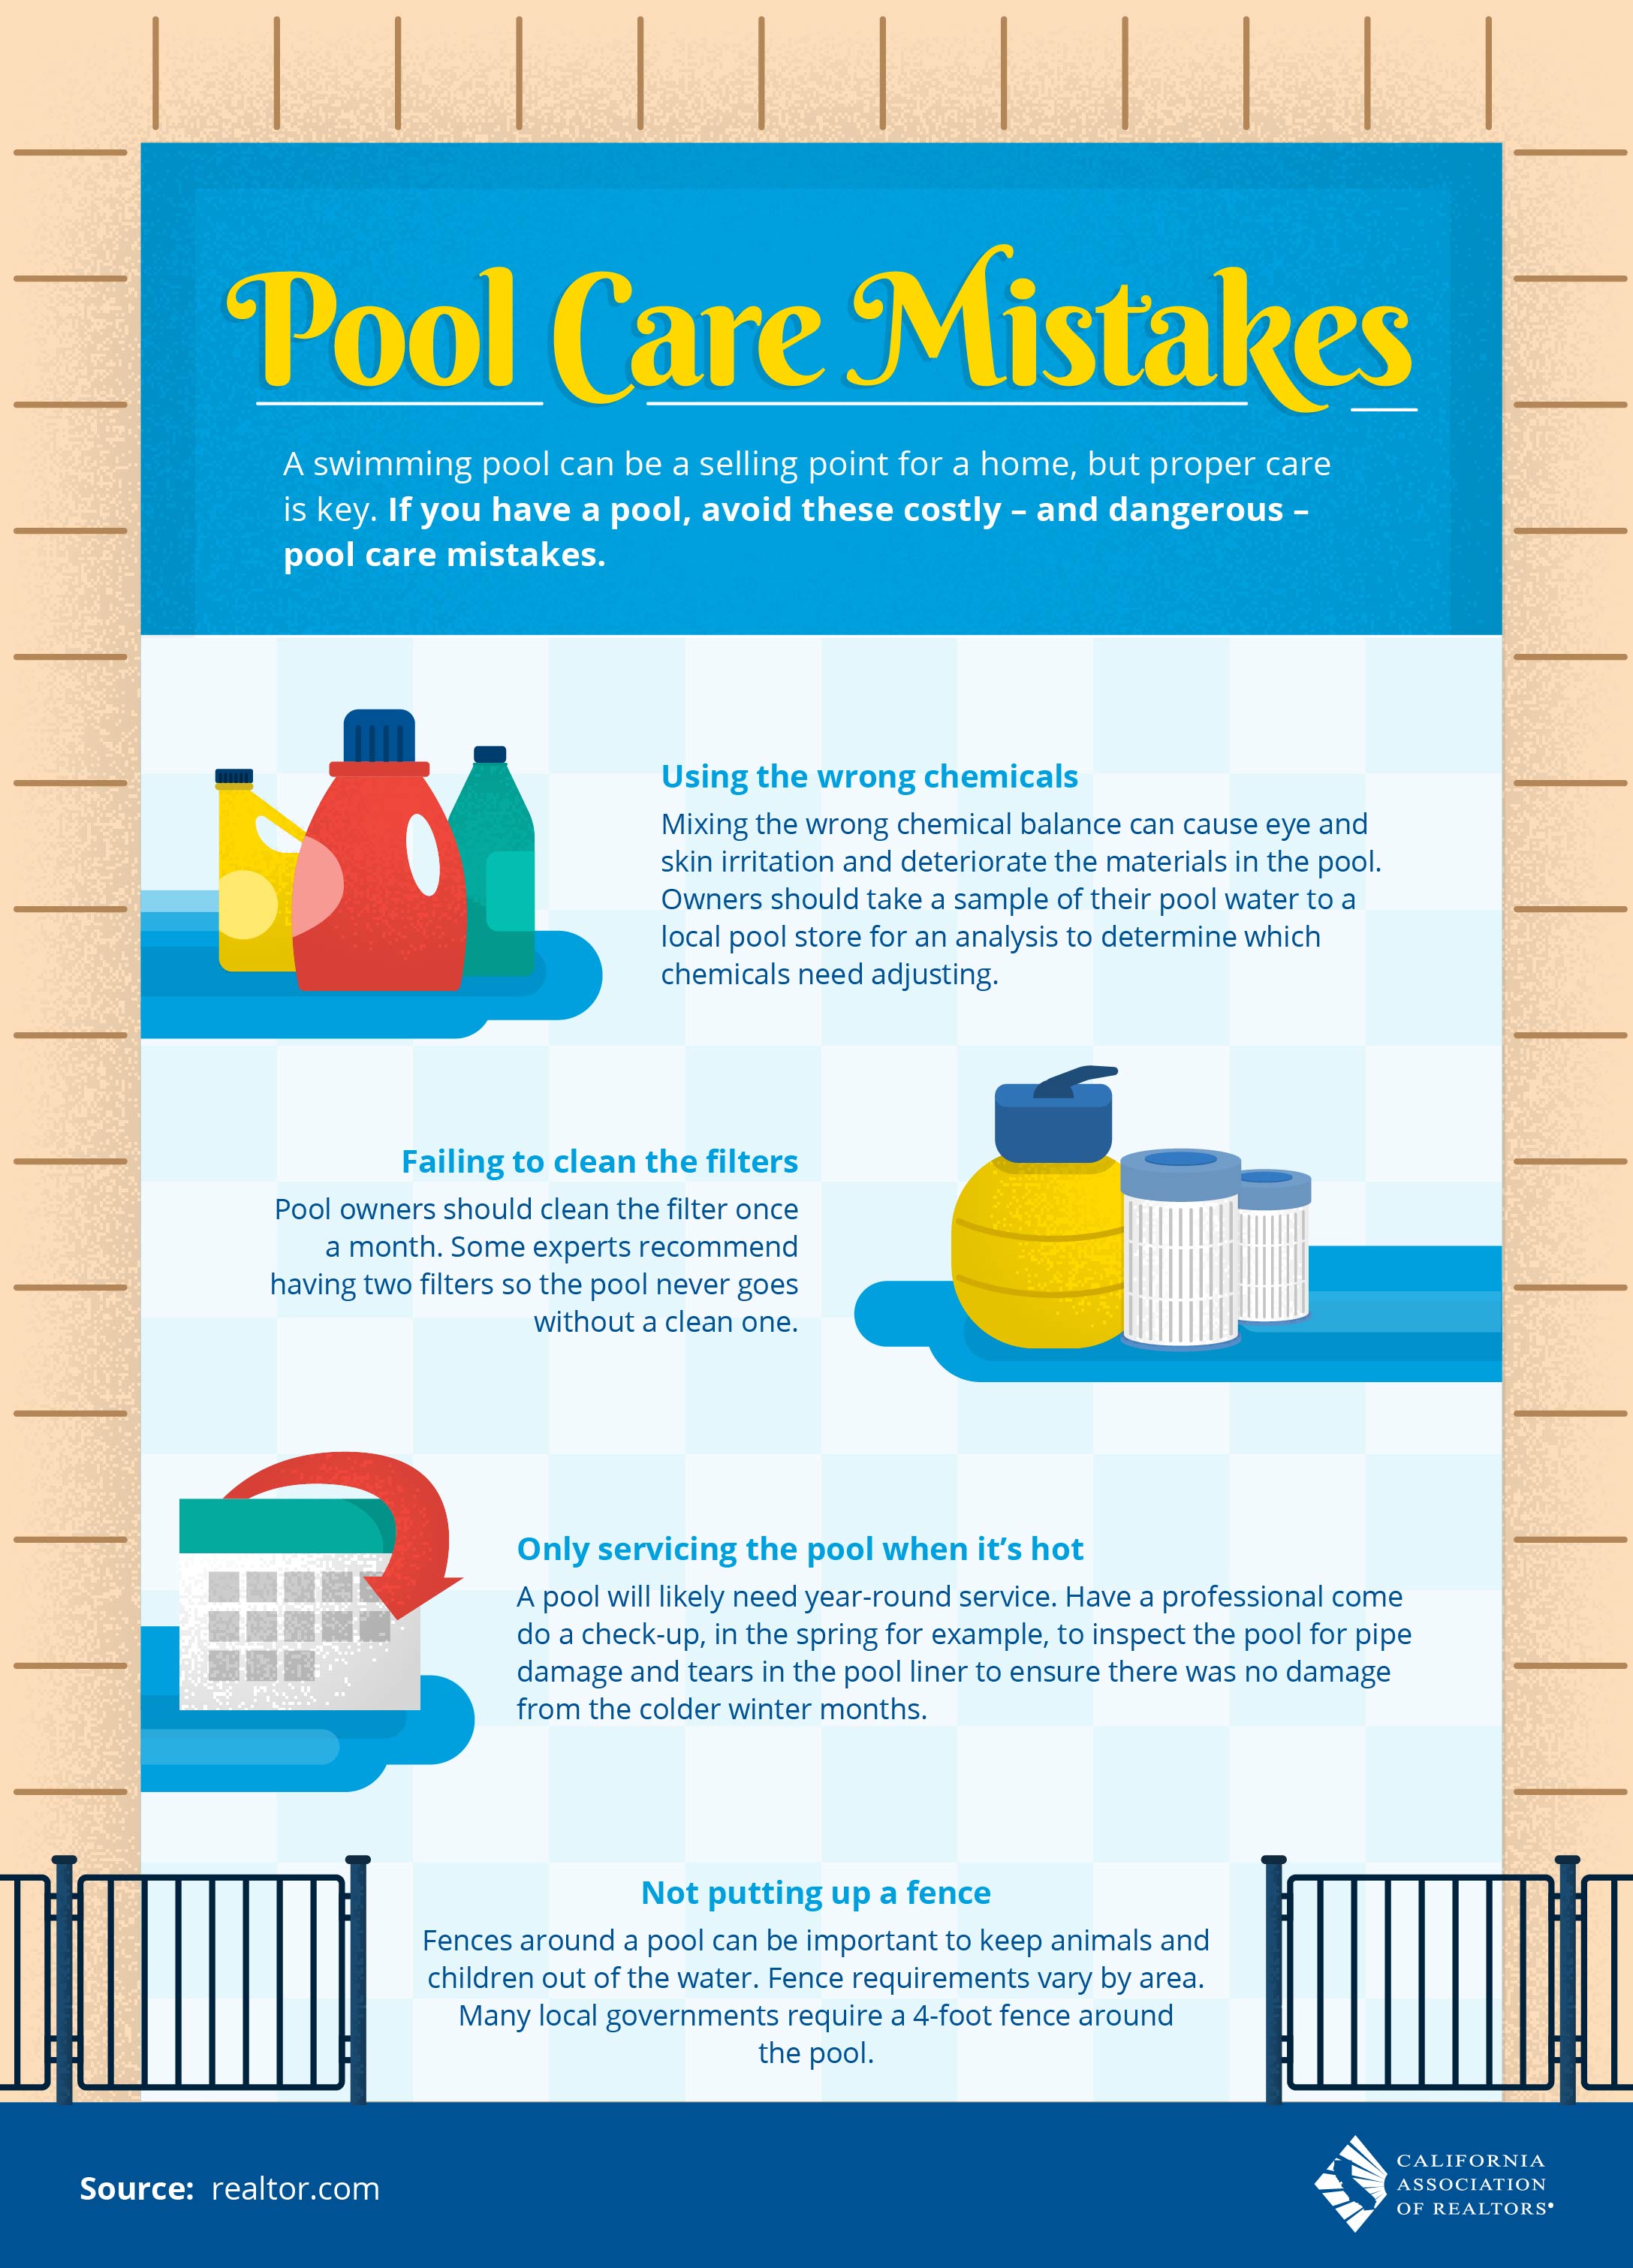 Pool-care-mistakes-hi-res